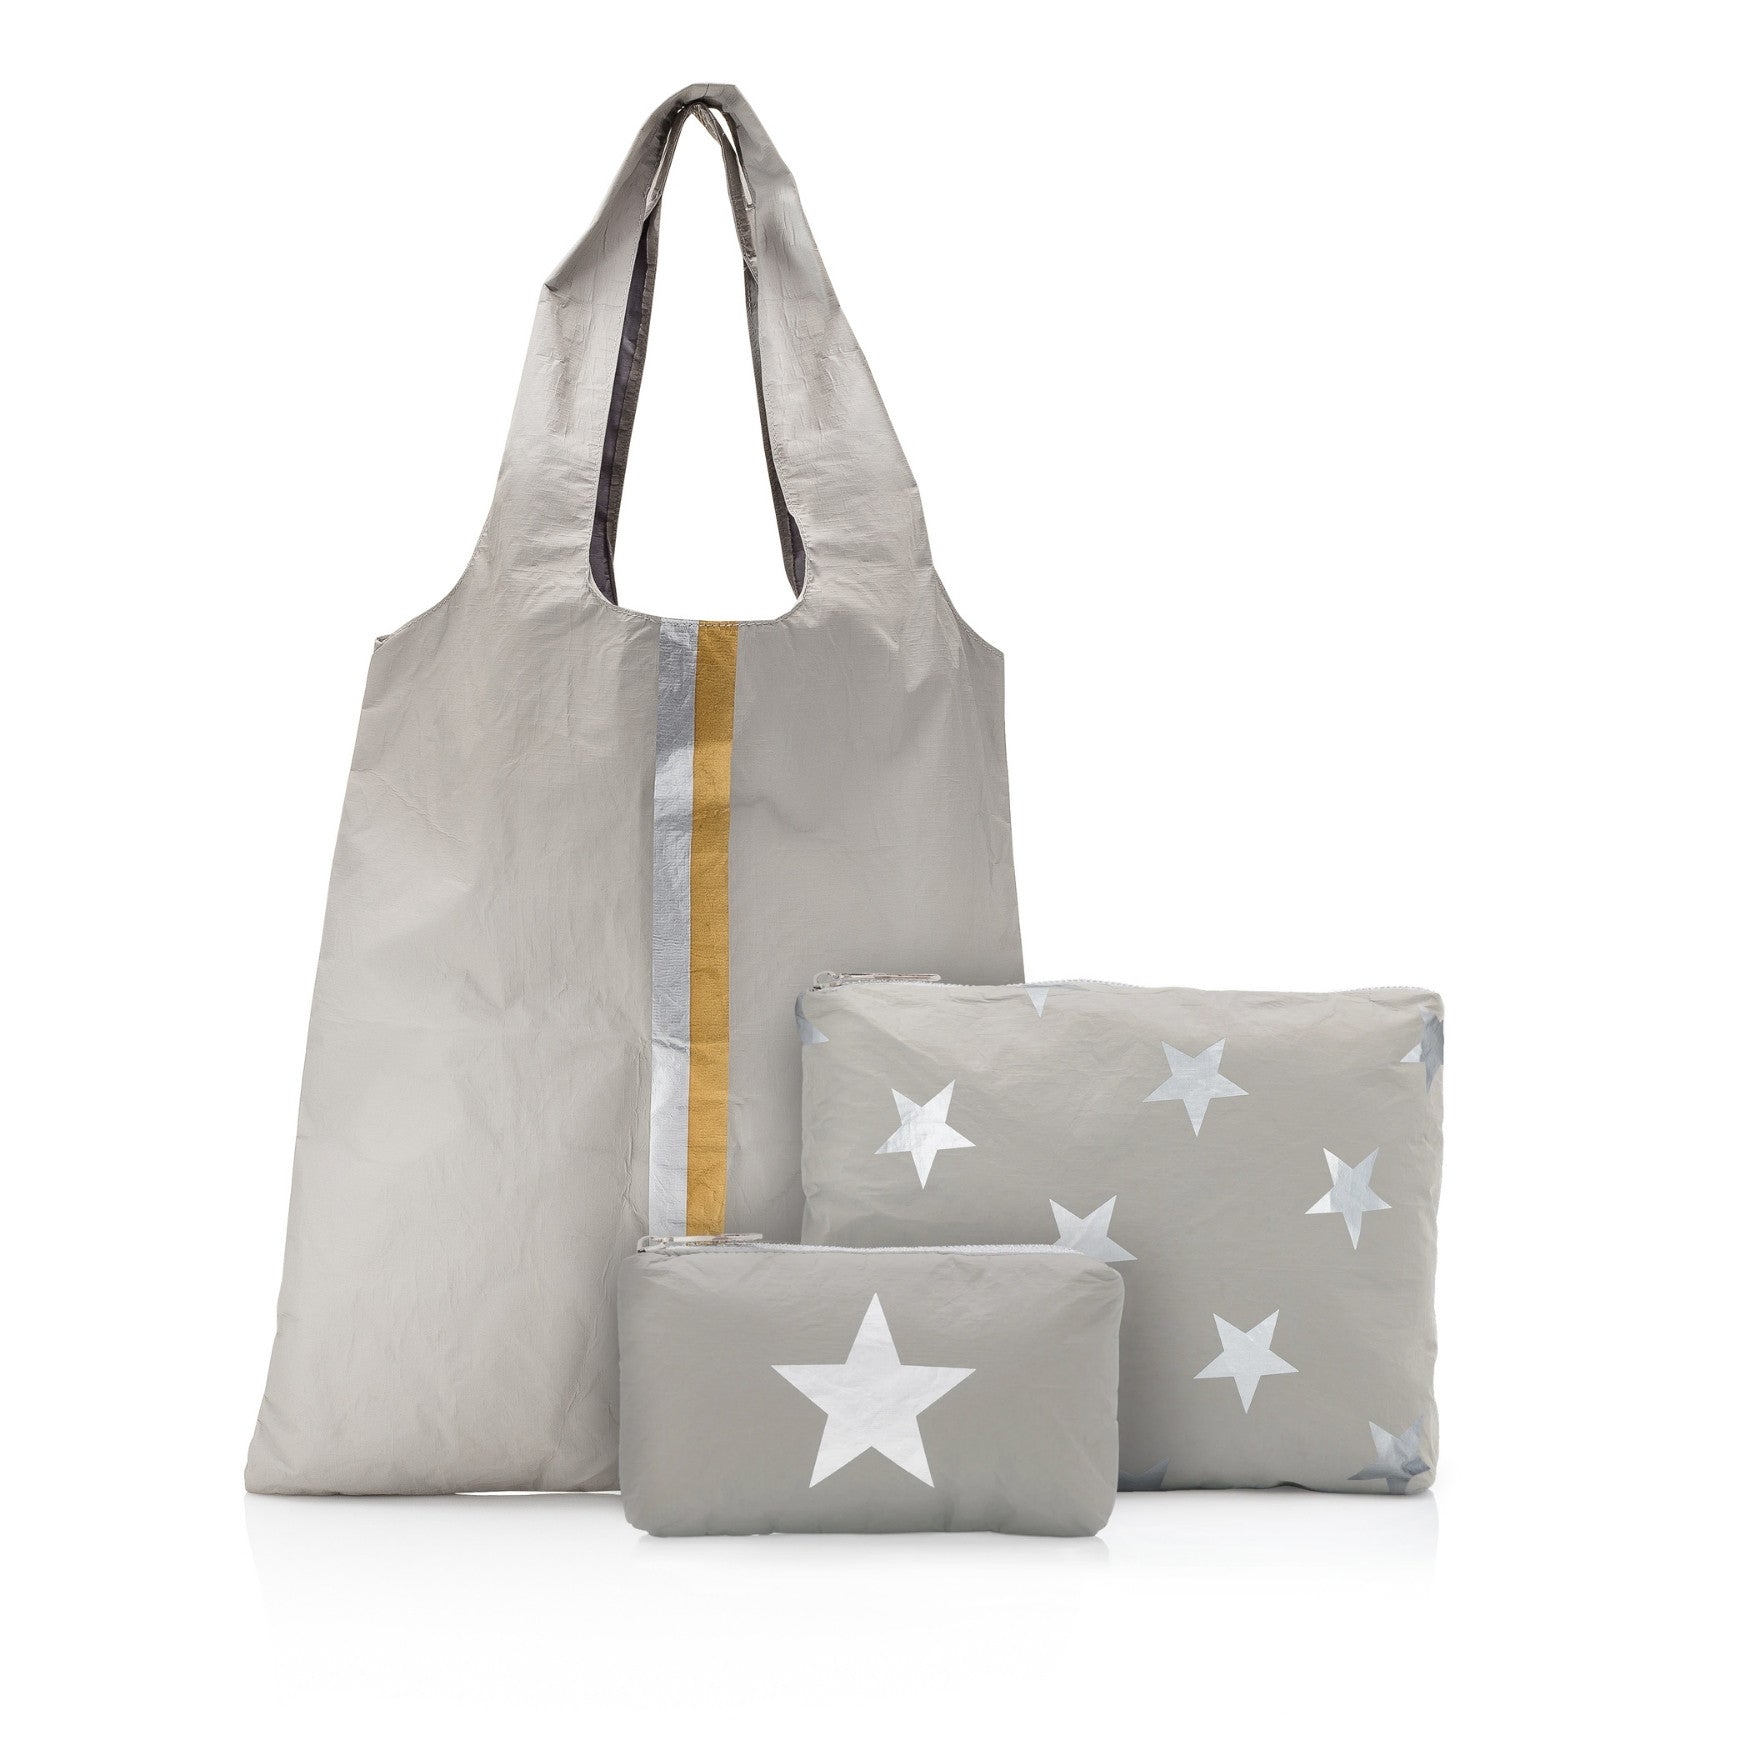 Set of Three Travel Packs - Everyday Tote Set in Earth Gray